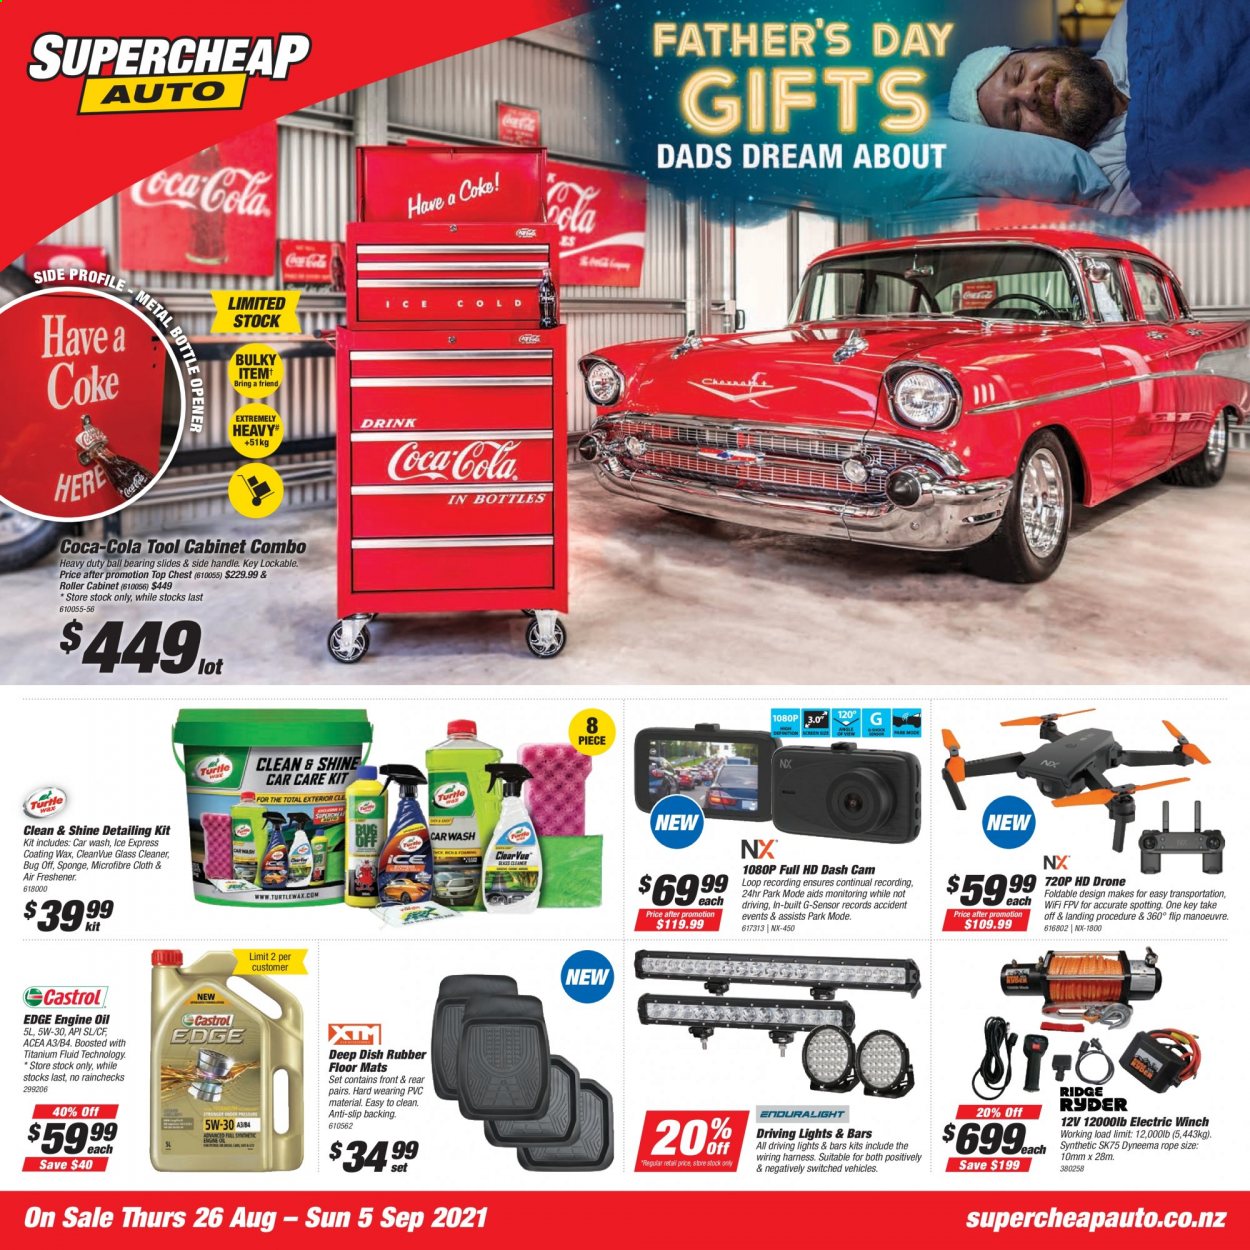 thumbnail - SuperCheap Auto mailer - 26.08.2021 - 05.09.2021 - Sales products - cleaner, glass cleaner, Ridge Ryder, sponge, drone, cabinet, tool cabinets, dashboard camera, car floor mats, driving lights, wiring harness, air freshener, motor oil, Castrol. Page 1.